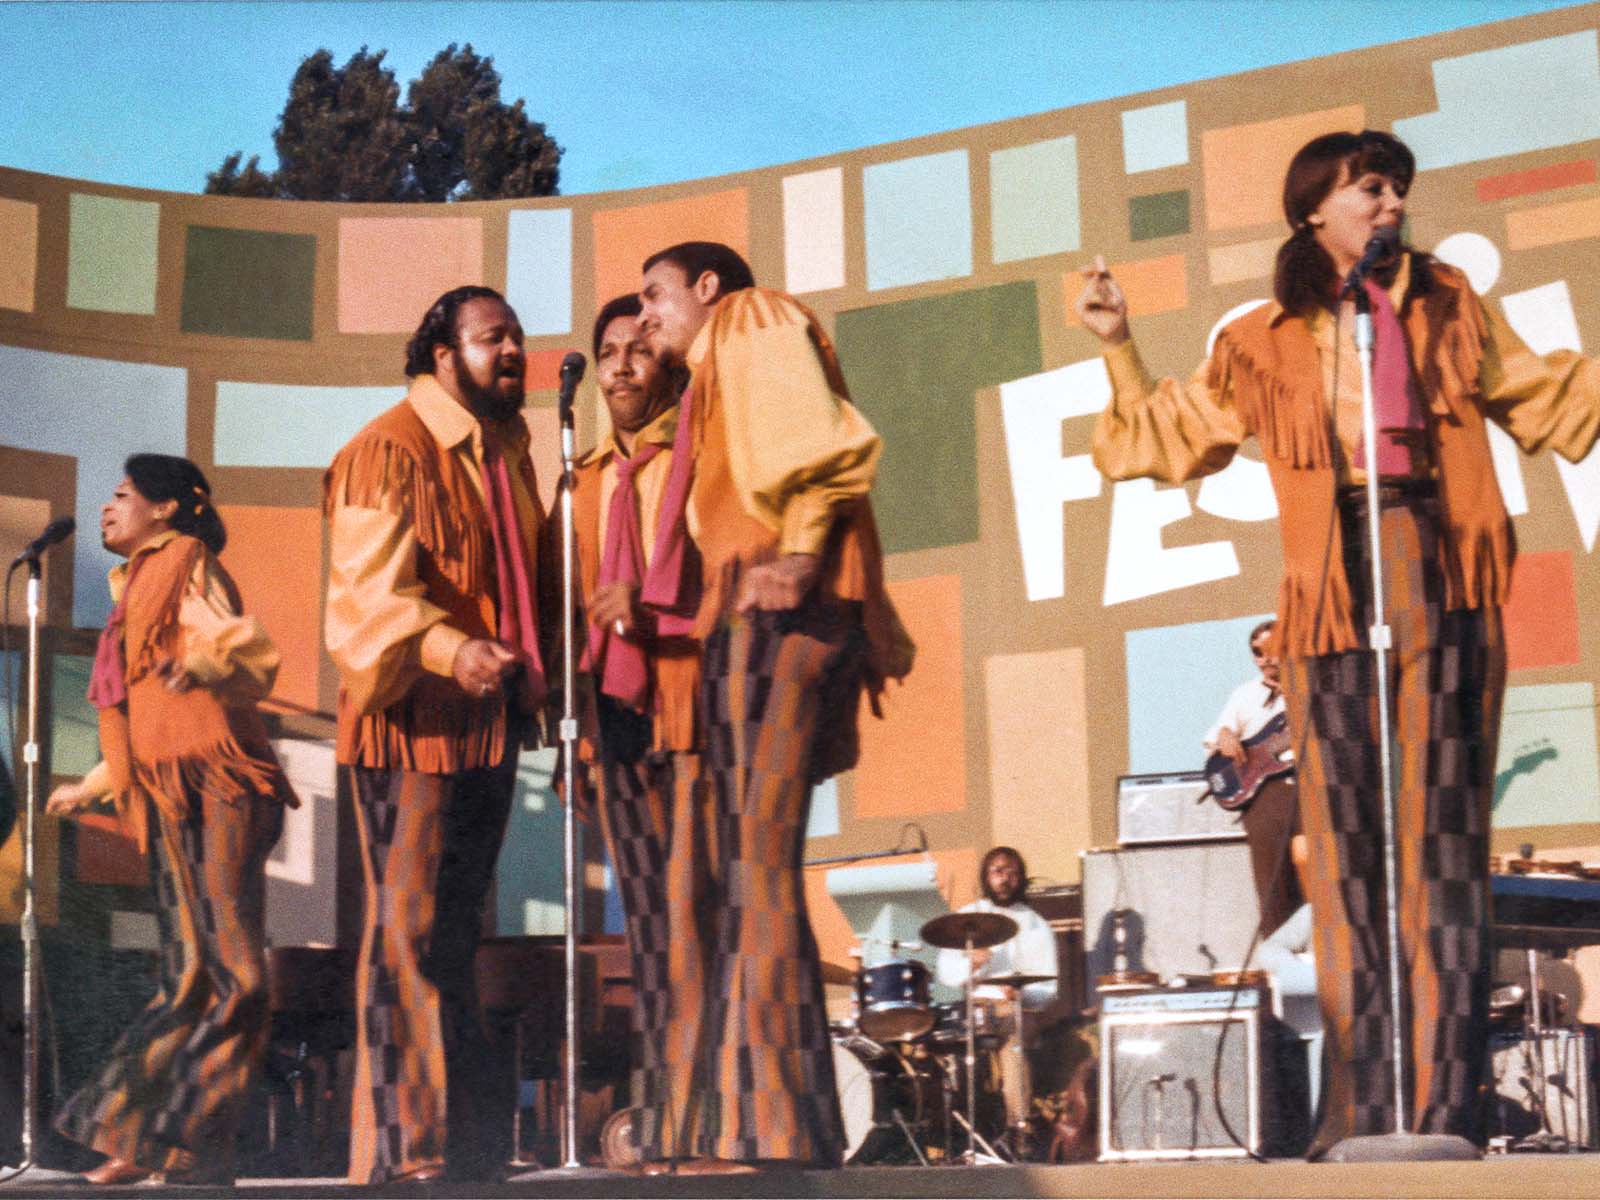 The 5th Dimension performing on stage in Summer of Soul. Image © 20th Century Studios